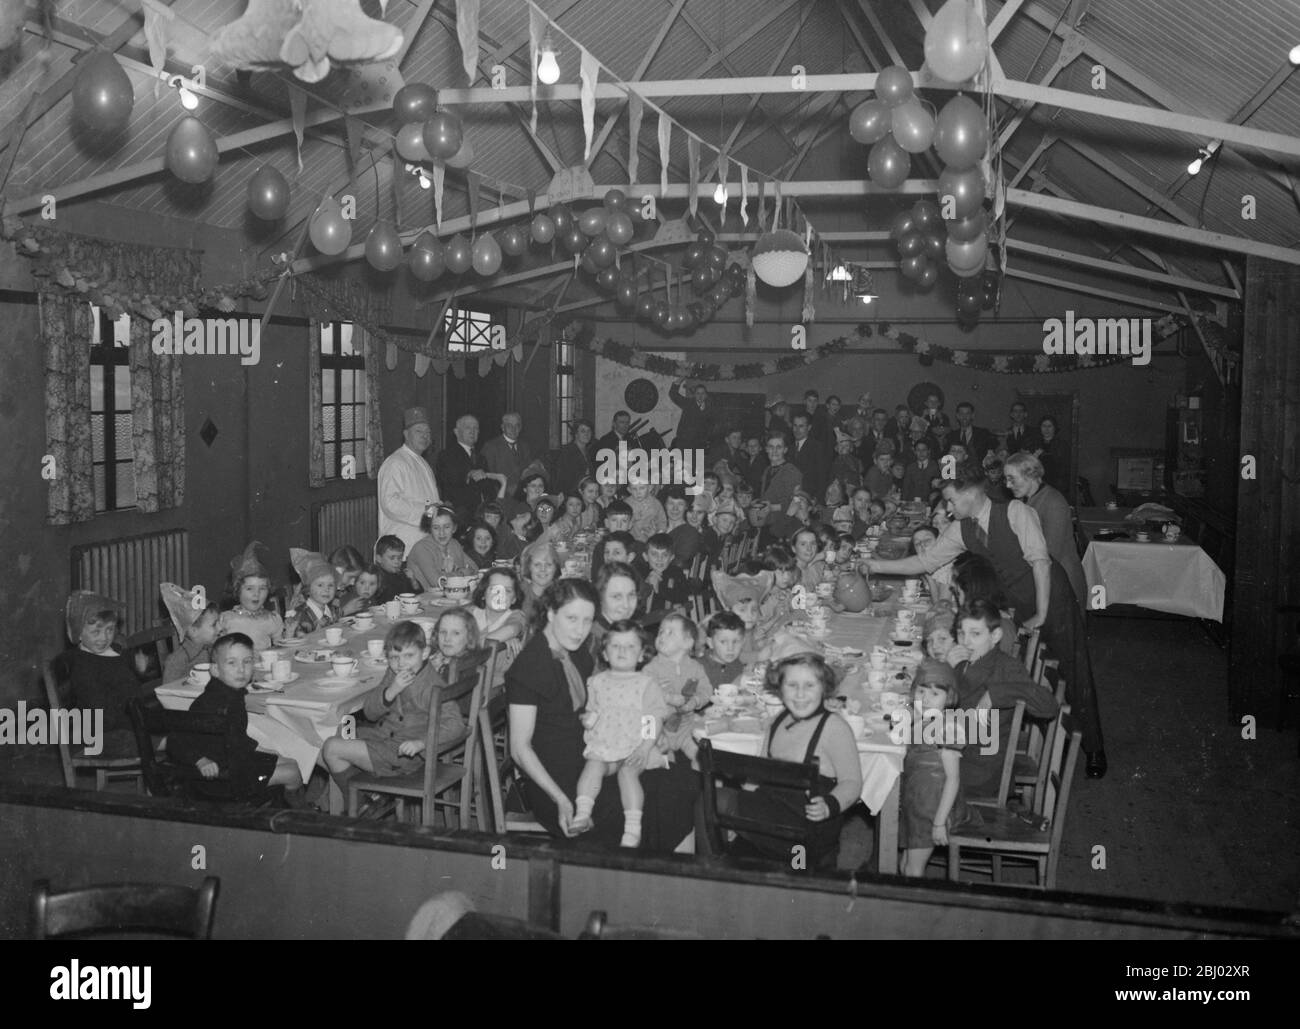 Boys and girls club Black and White Stock Photos & Images - Alamy